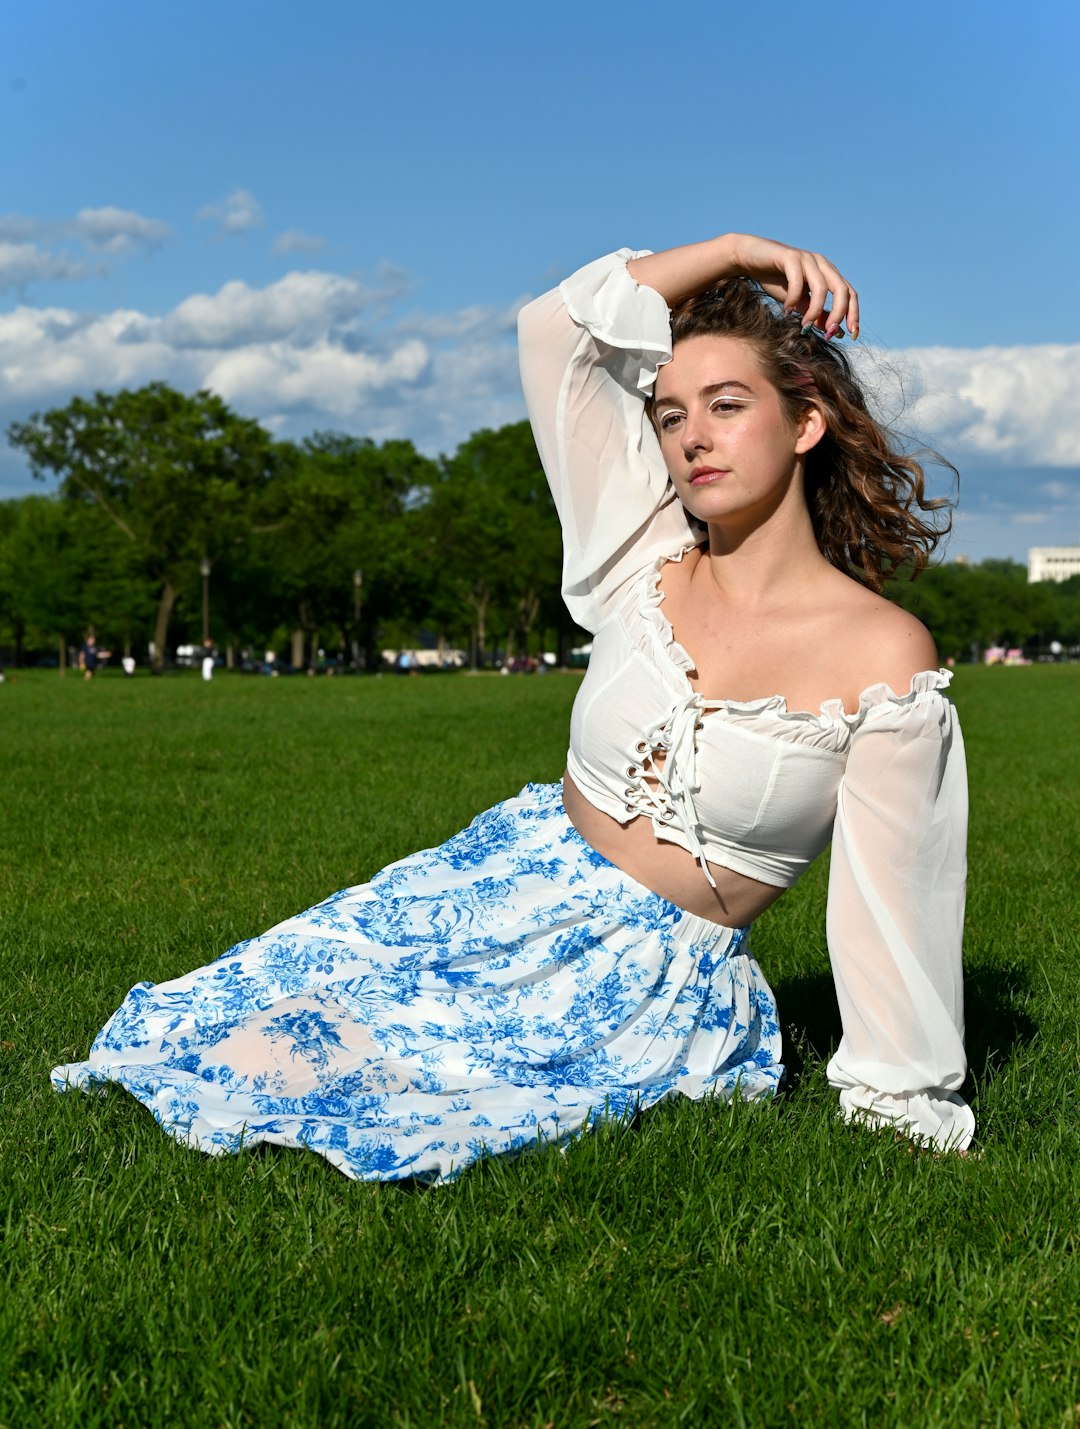 woman in white and blue floral dress lying on green grass field under blue sky during